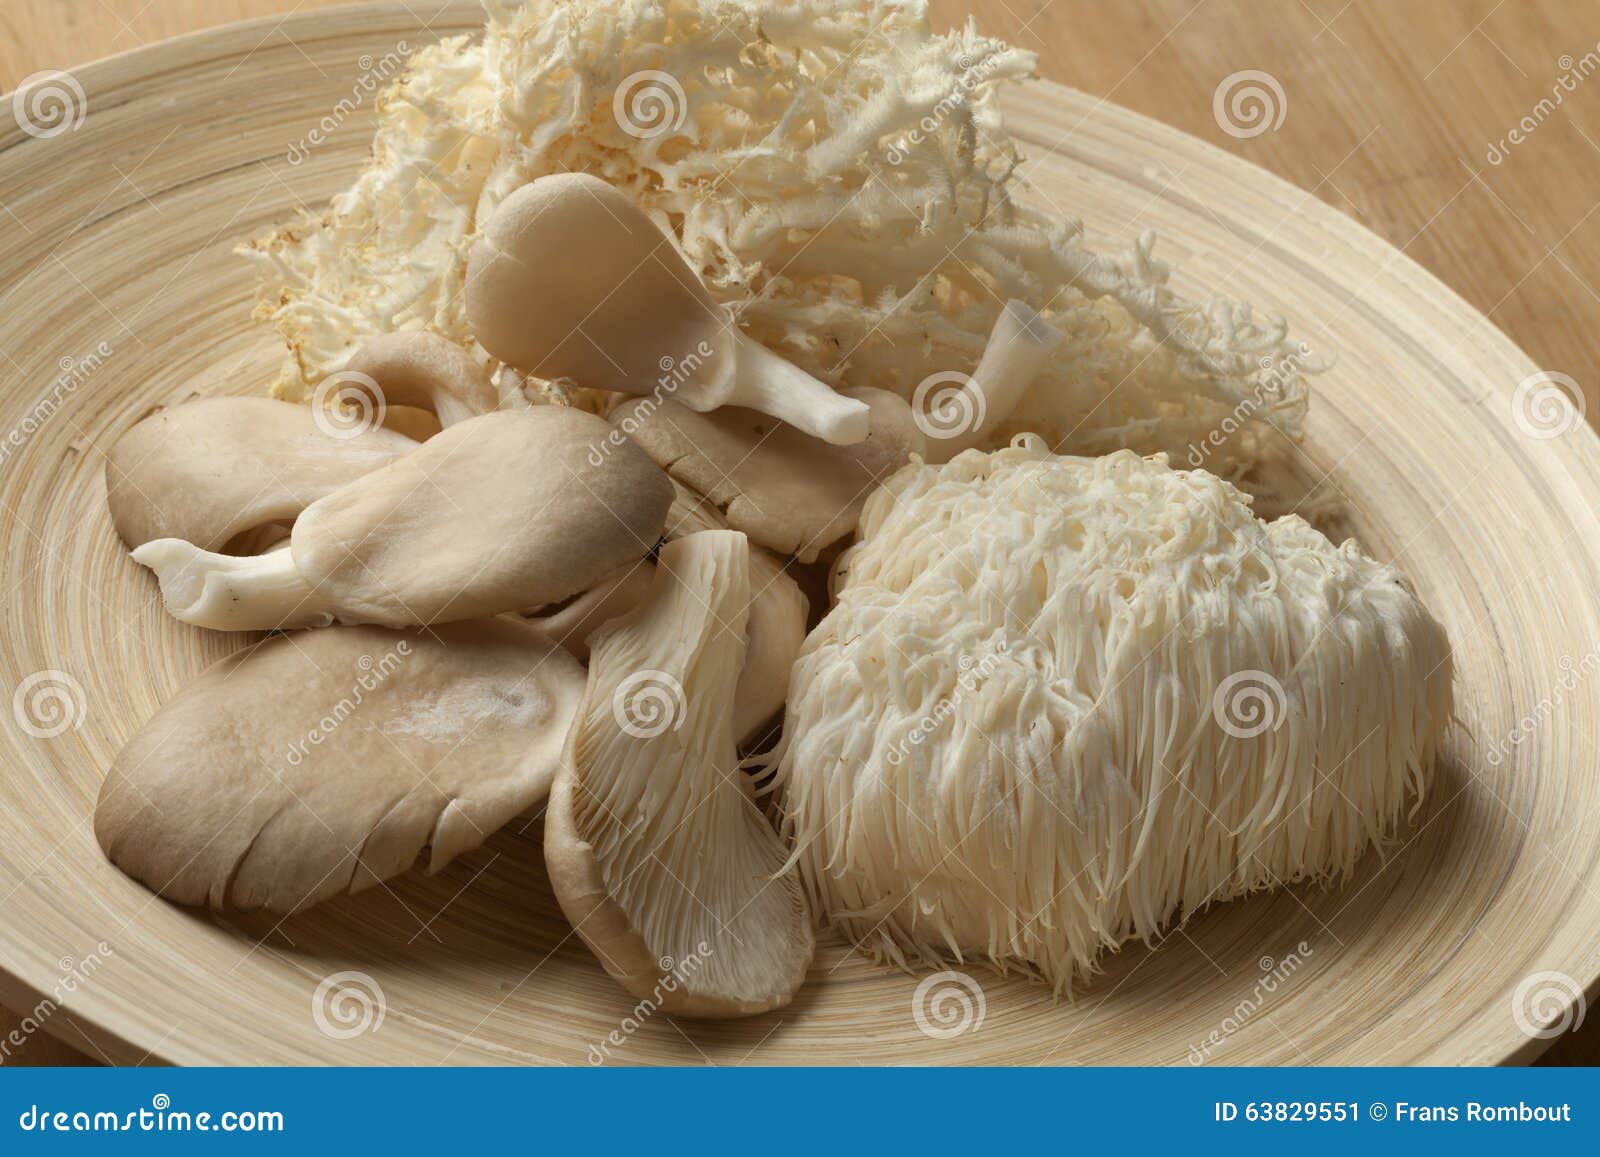 bowl with coral fungus, lion's mane mushroom and oyster mushroom